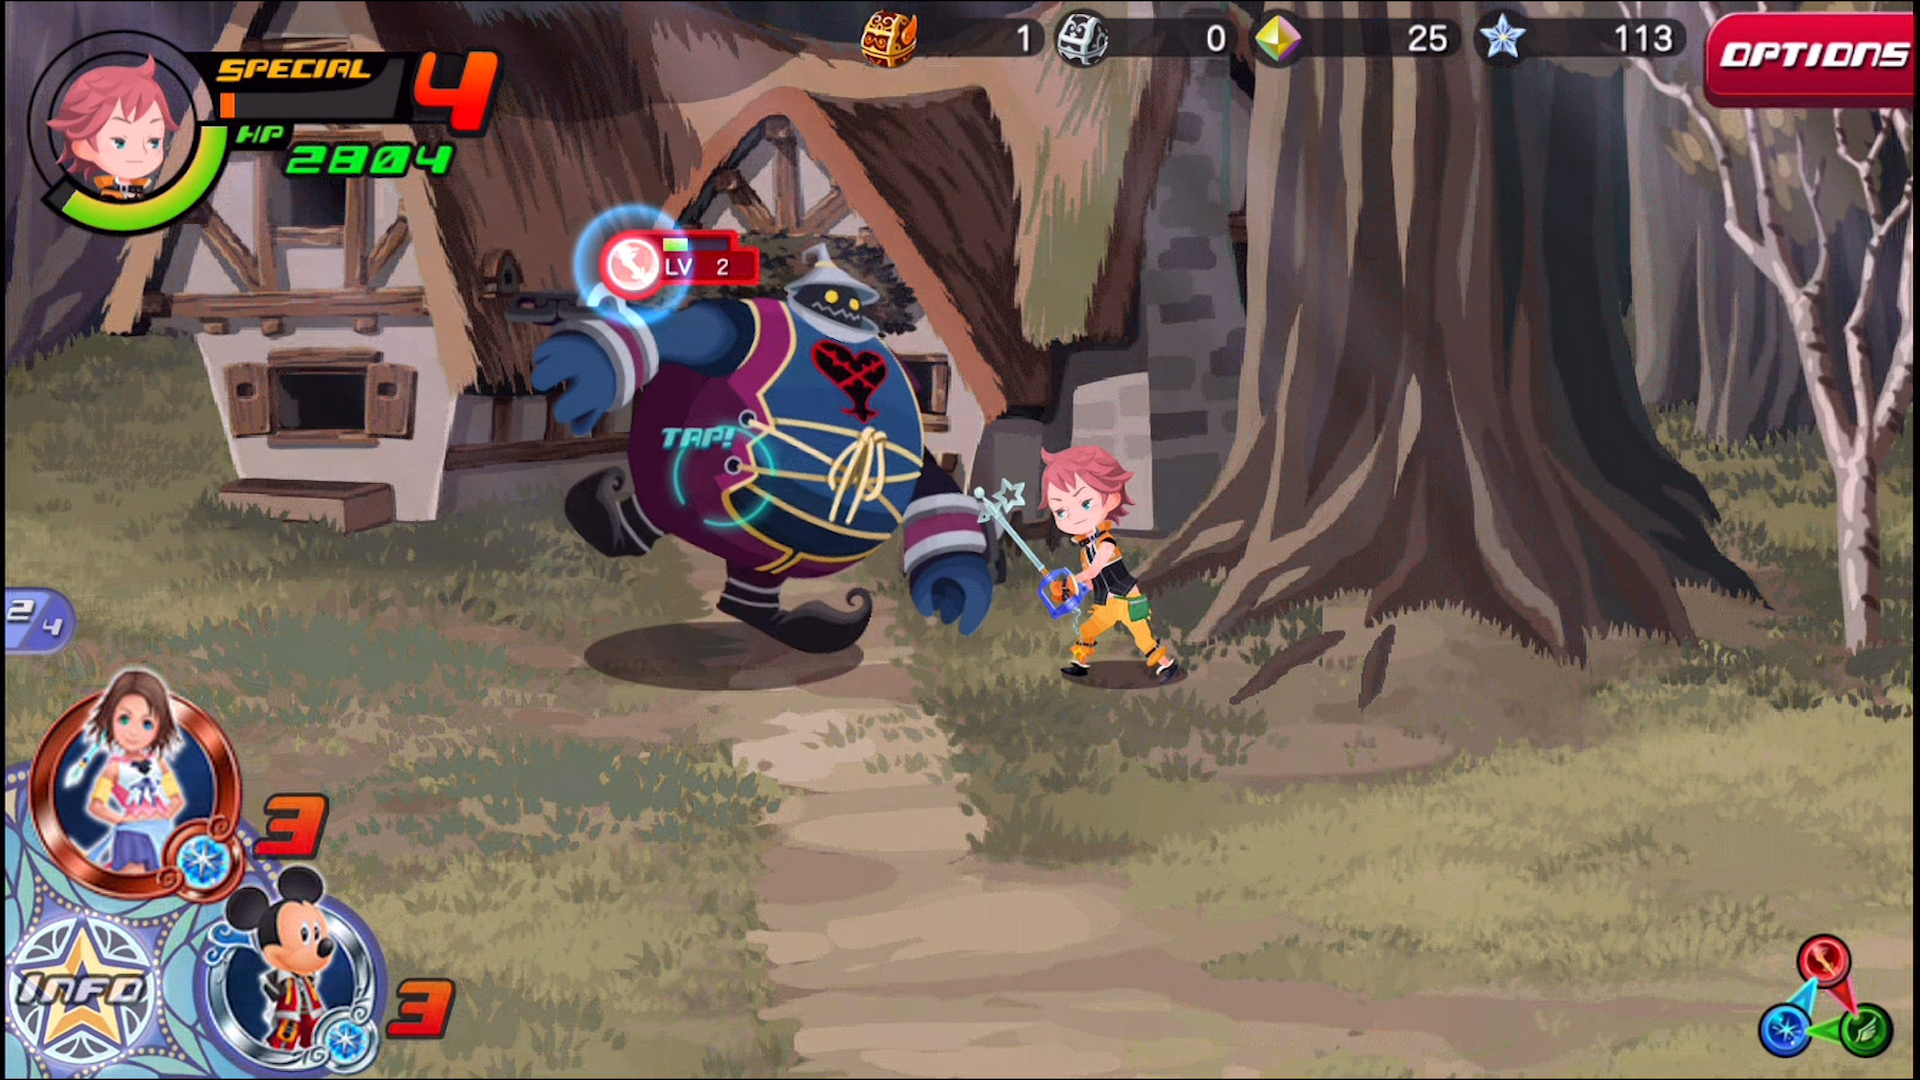 Unchained χ Is A Pleasant Little Slice Of Kingdom Hearts